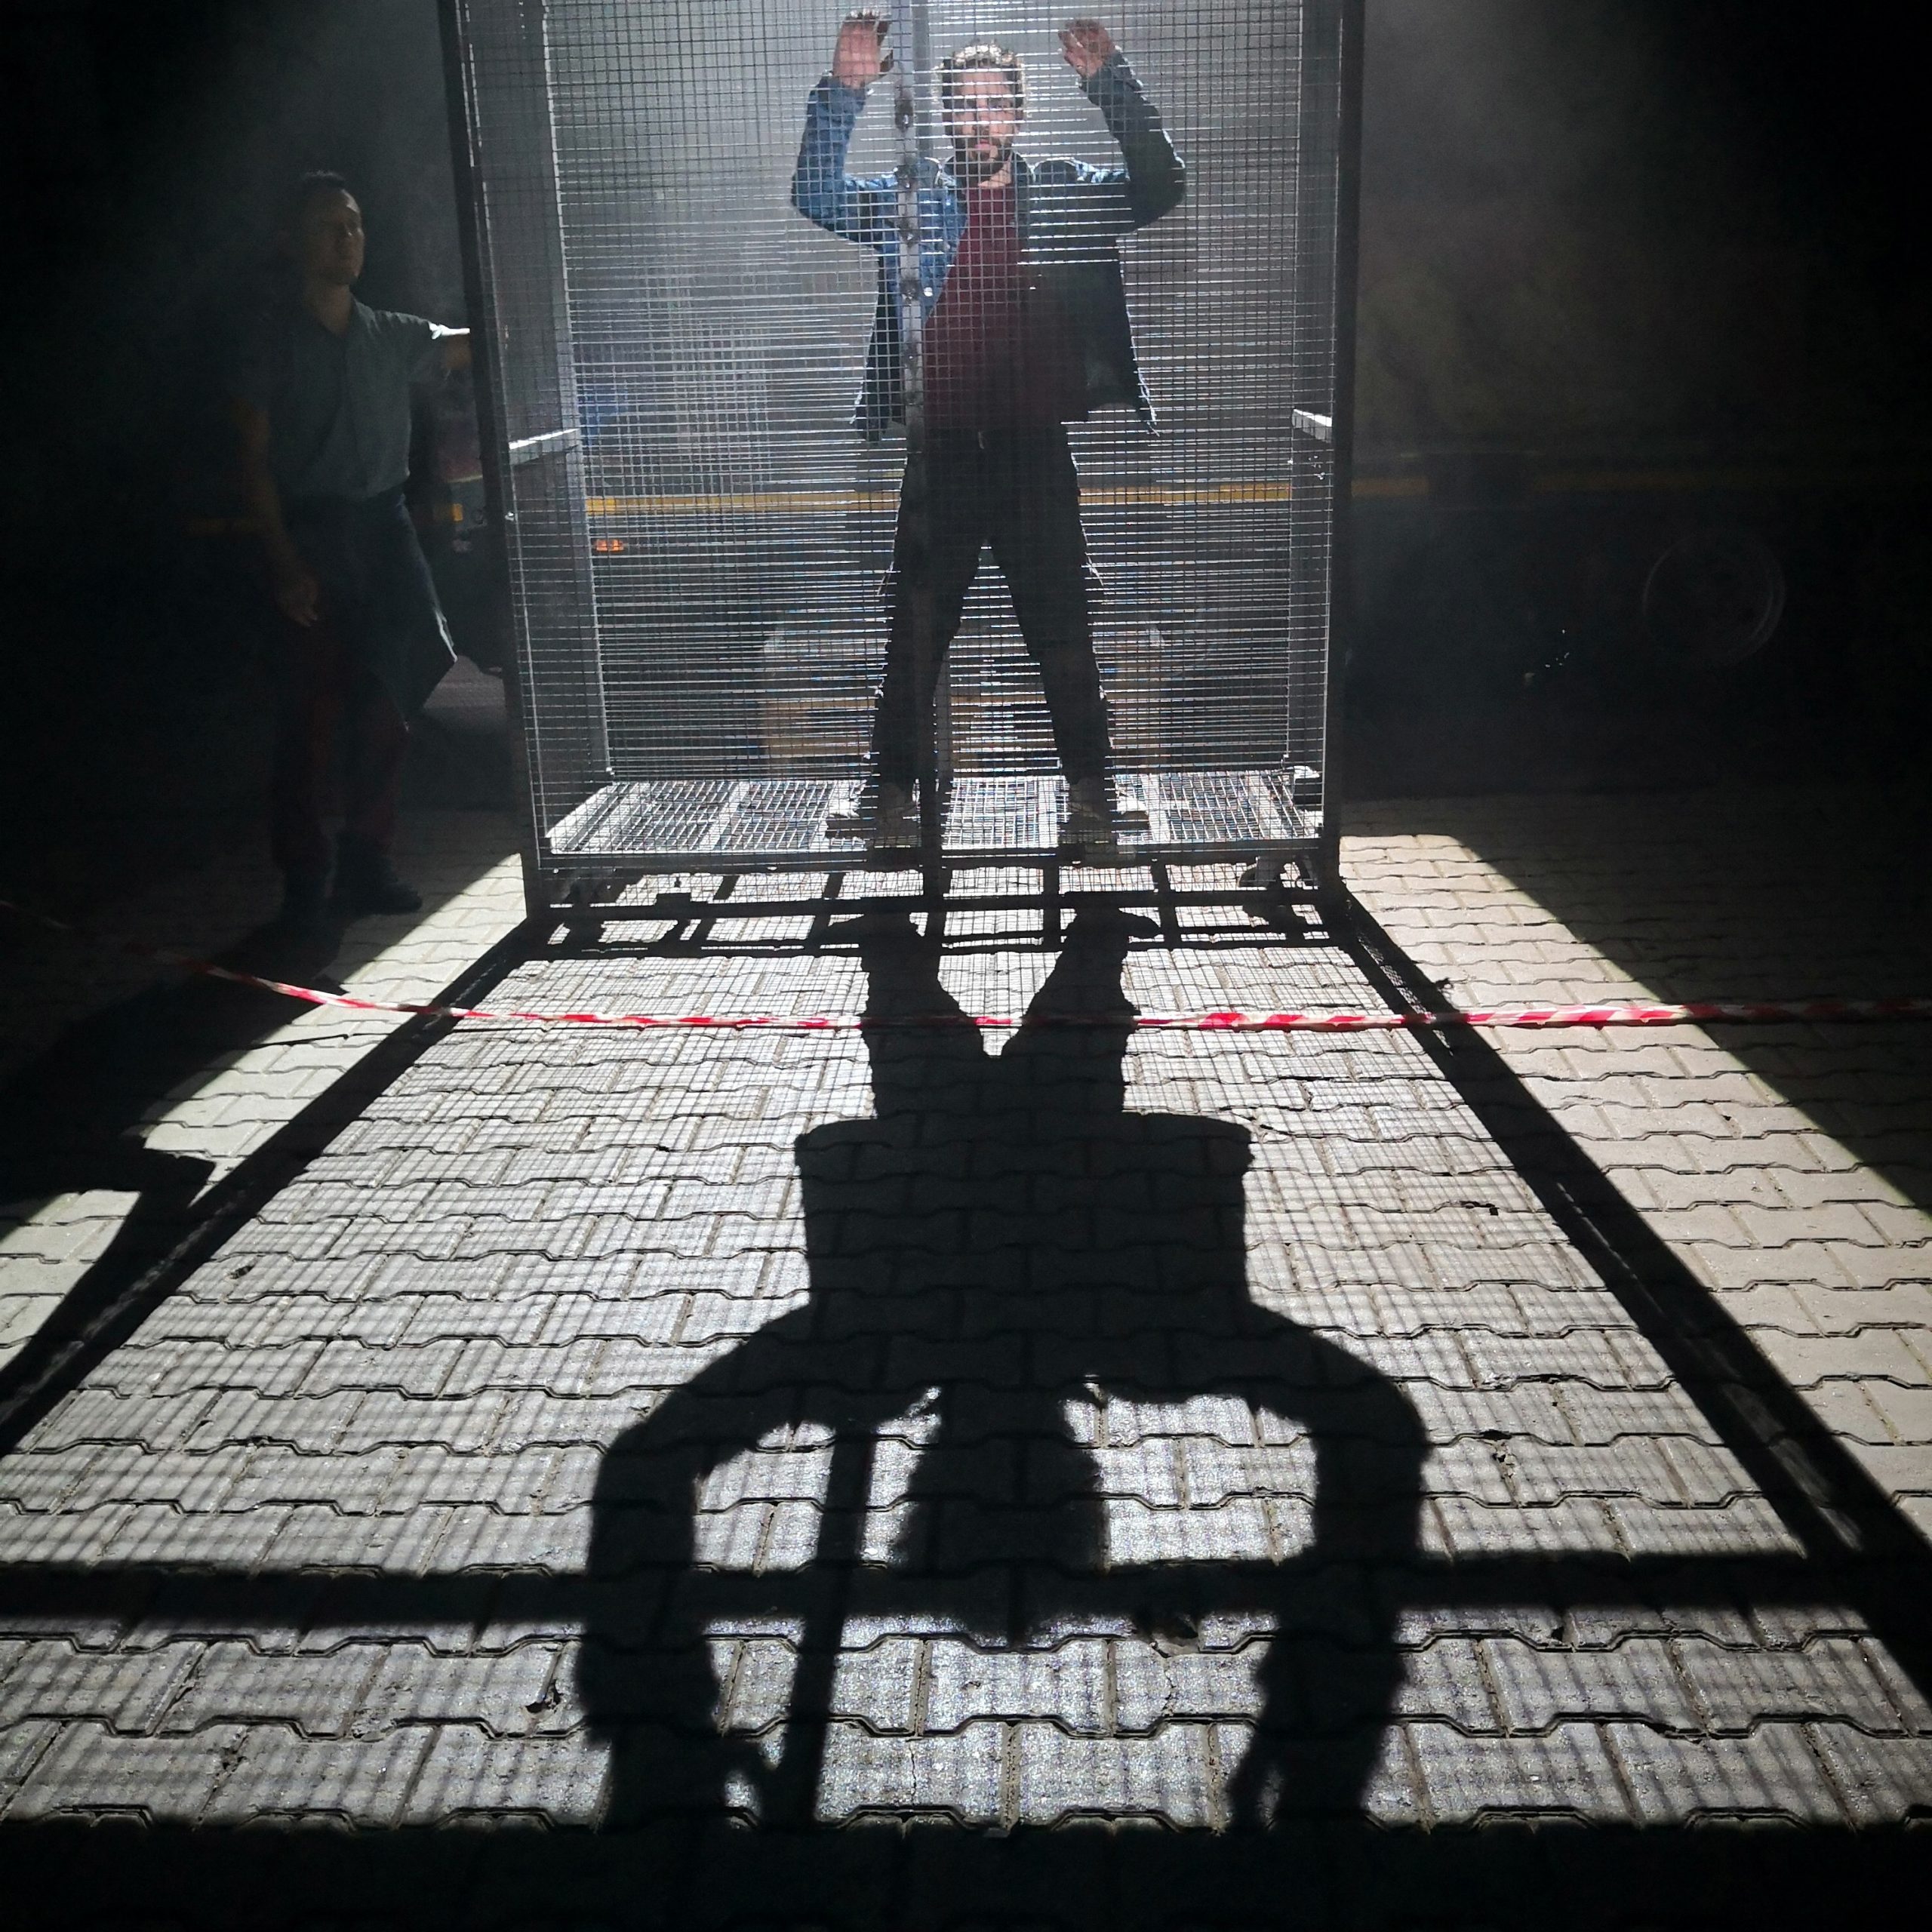 a performer stands in a cage with his arms raised. He is lit from behind and his body casts a long shadow in the foreground.